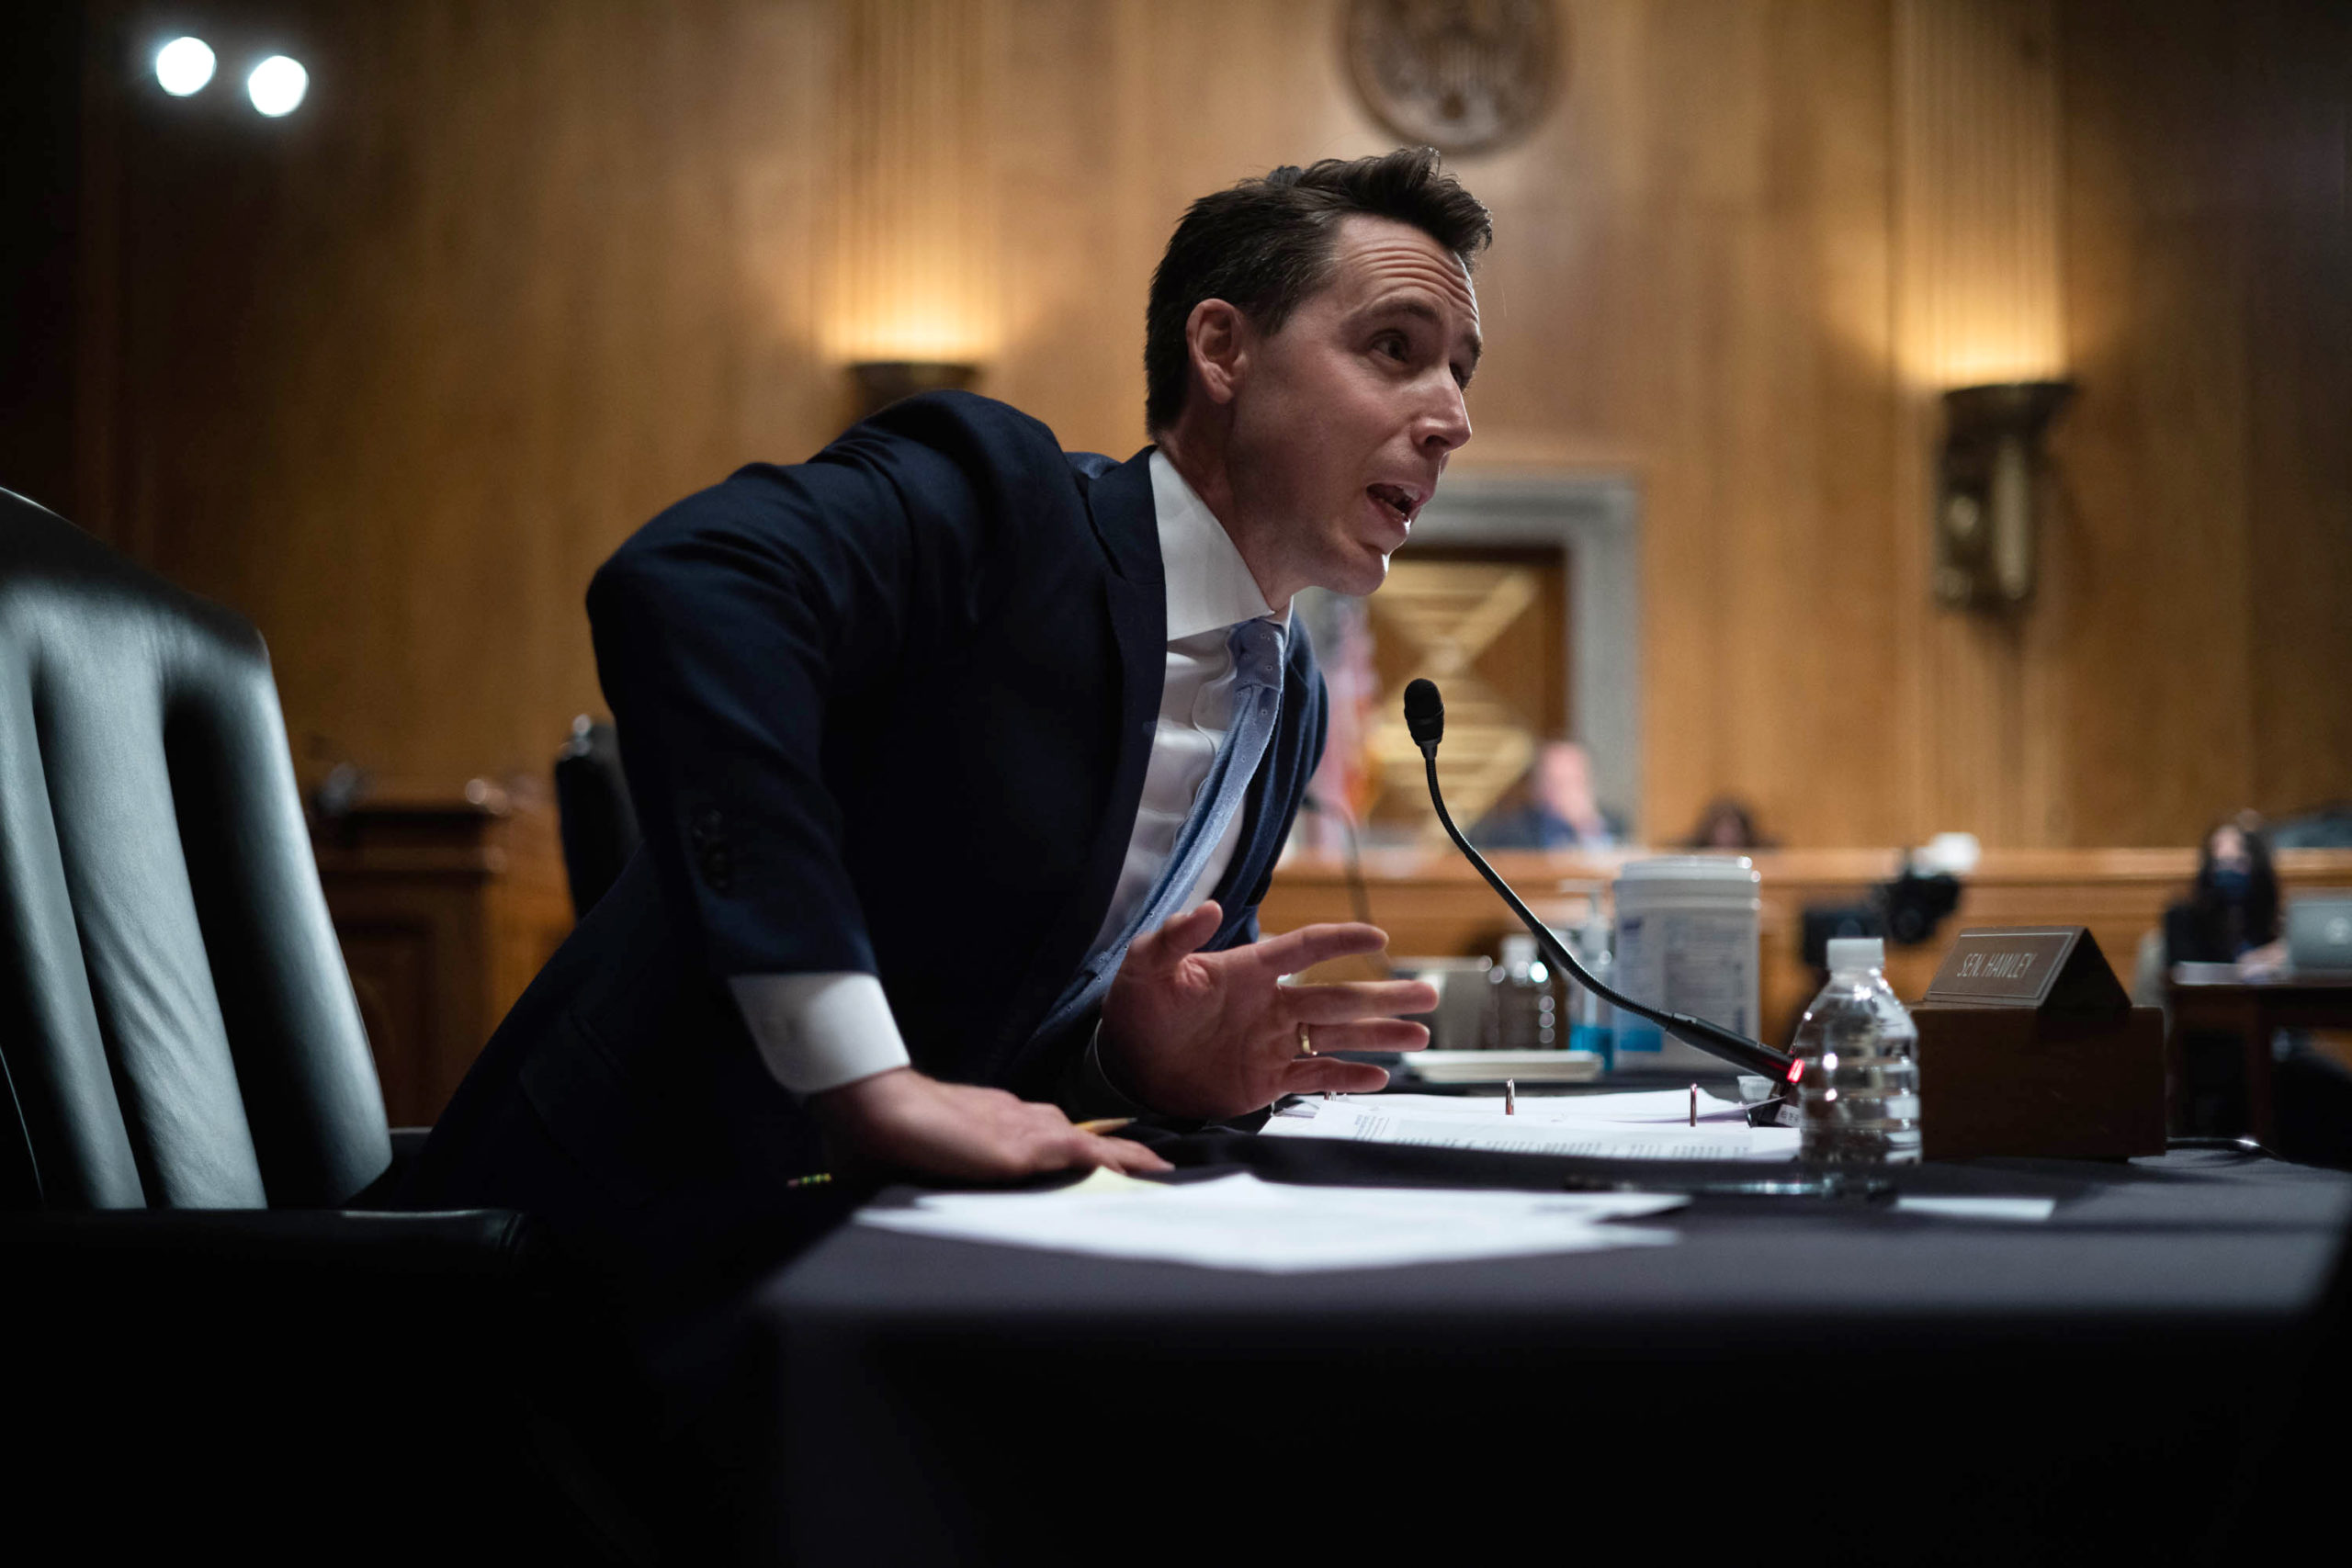 Senator Josh Hawley (R-MO) questions Alejandro Mayorkas, Secretary of Homeland Security, during a Senate Homeland Security and Government Affairs Committee hearing May 13, 2021 on Capitol Hill in Washington, DC. (Photo by Graeme Jennings-Pool/Getty Images)